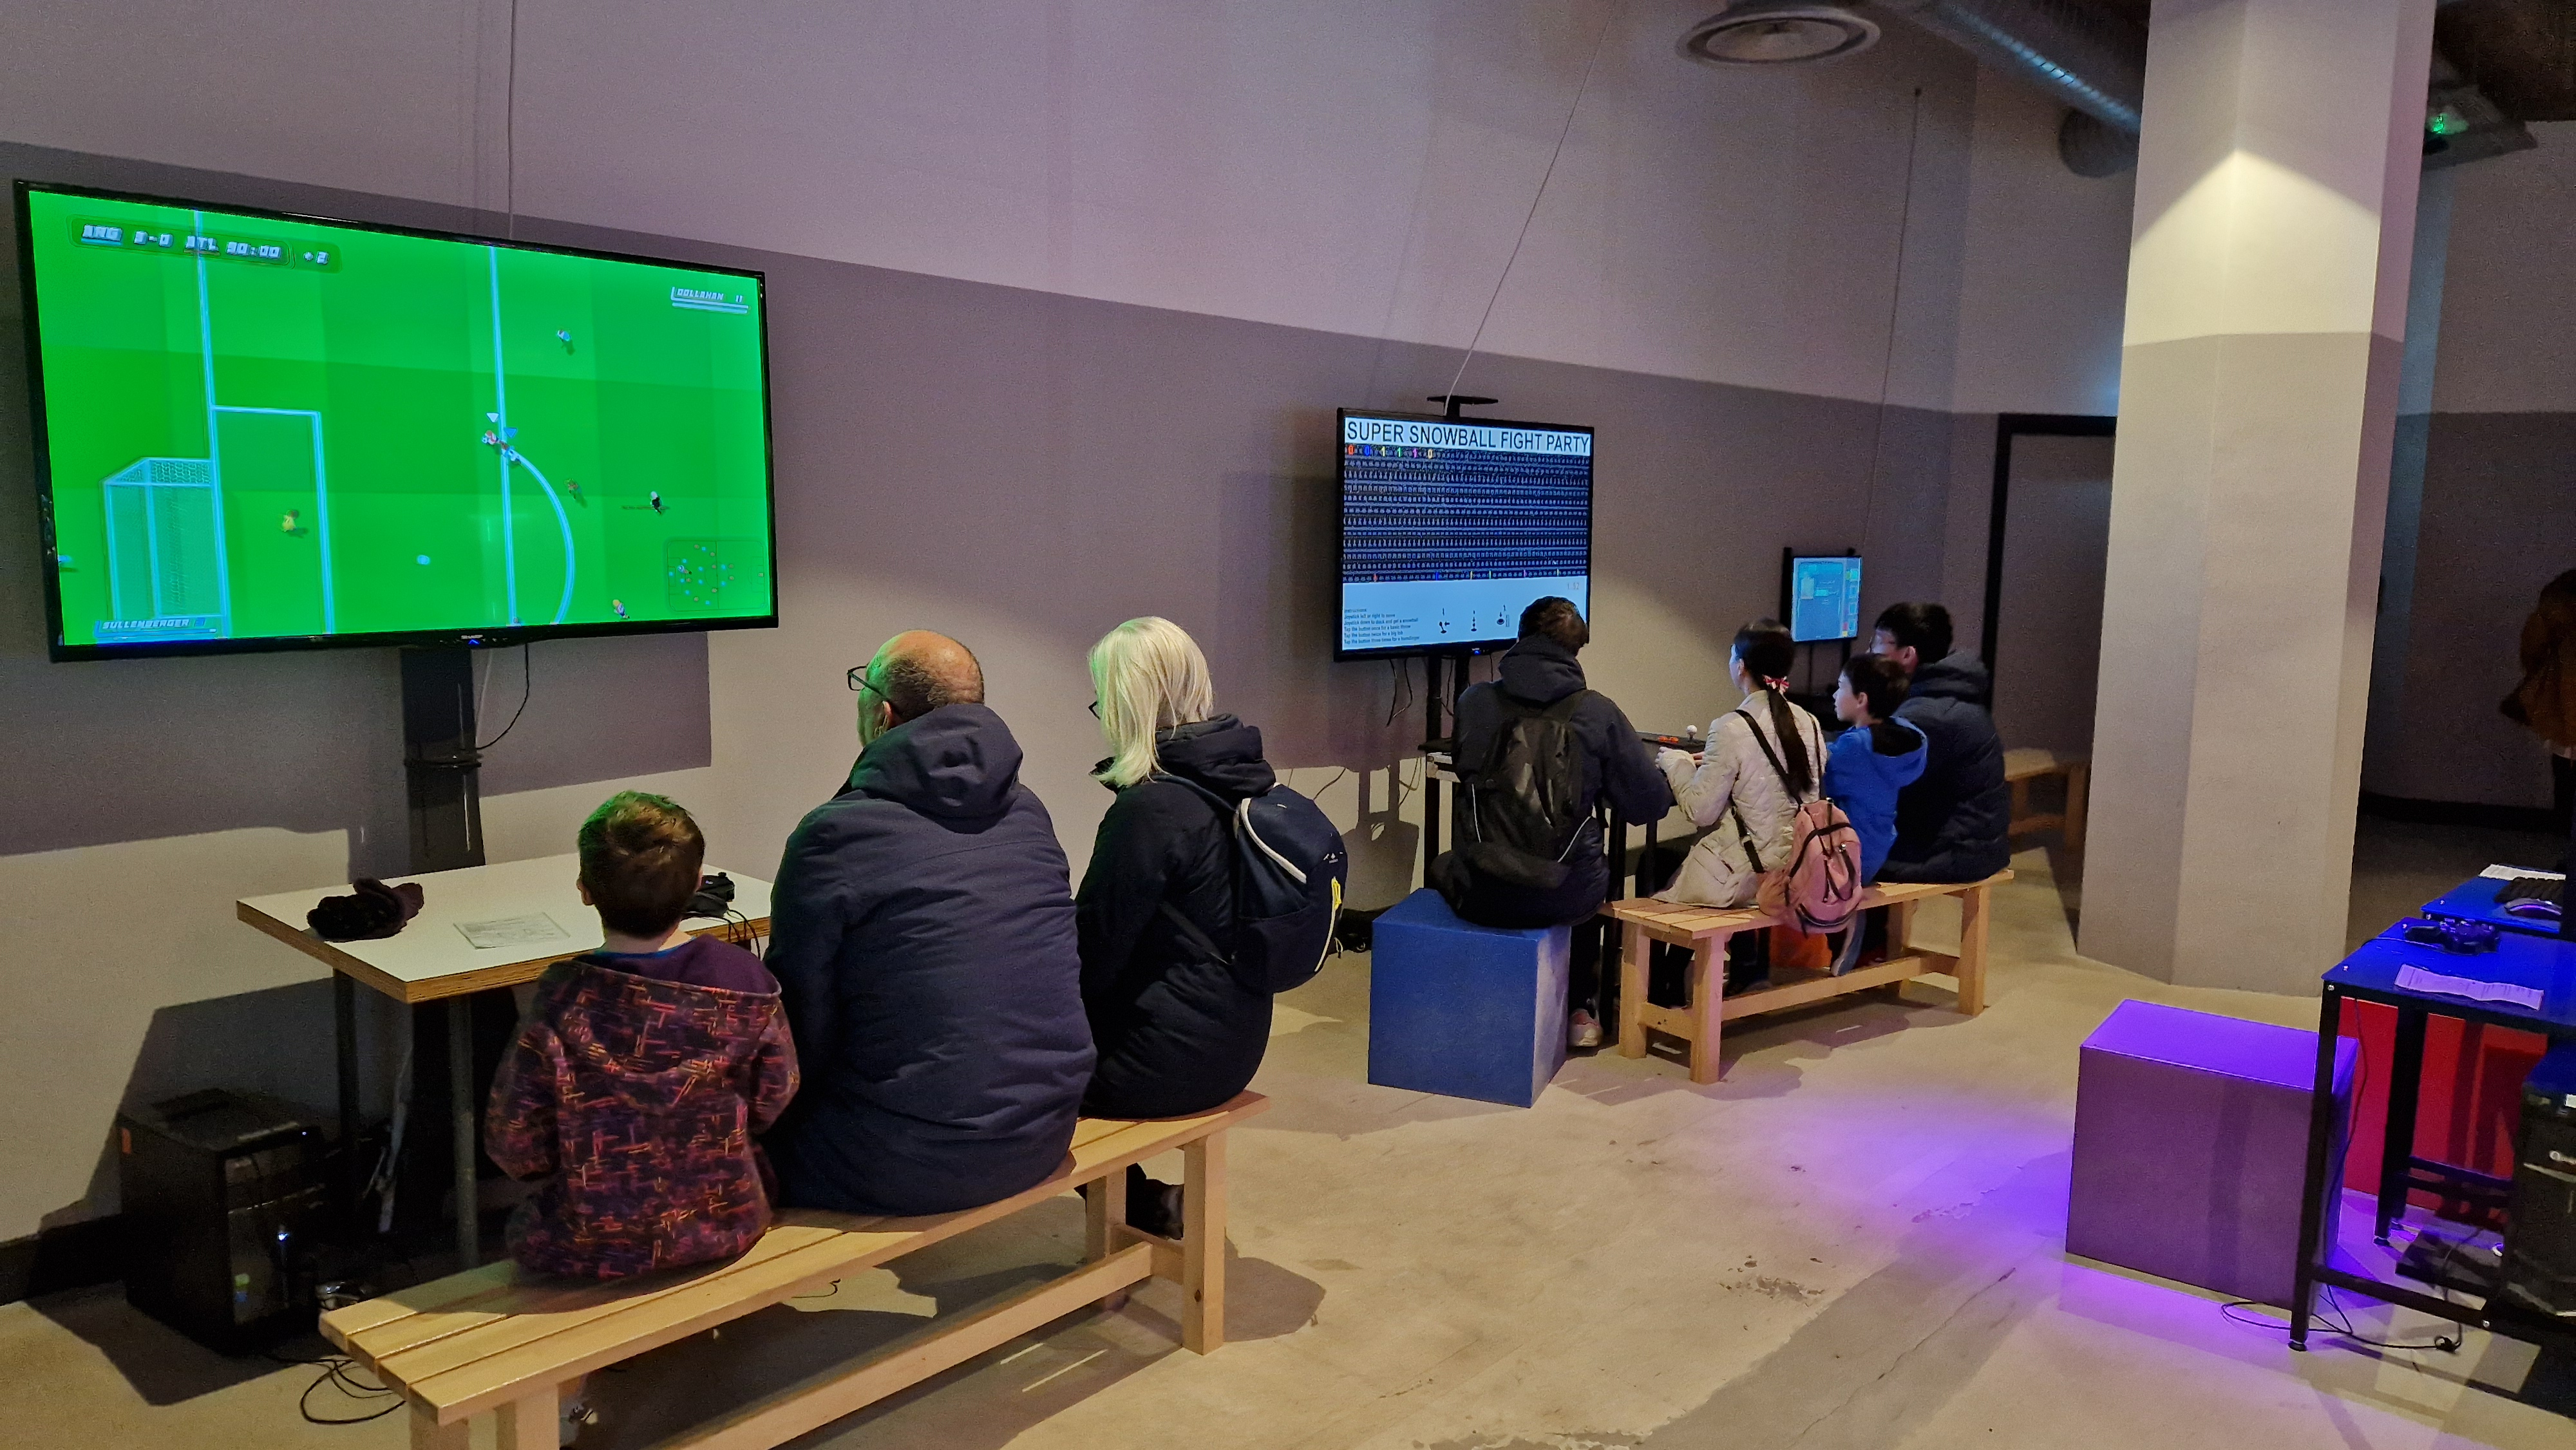 A picture of two groups of people playing games at the NVM